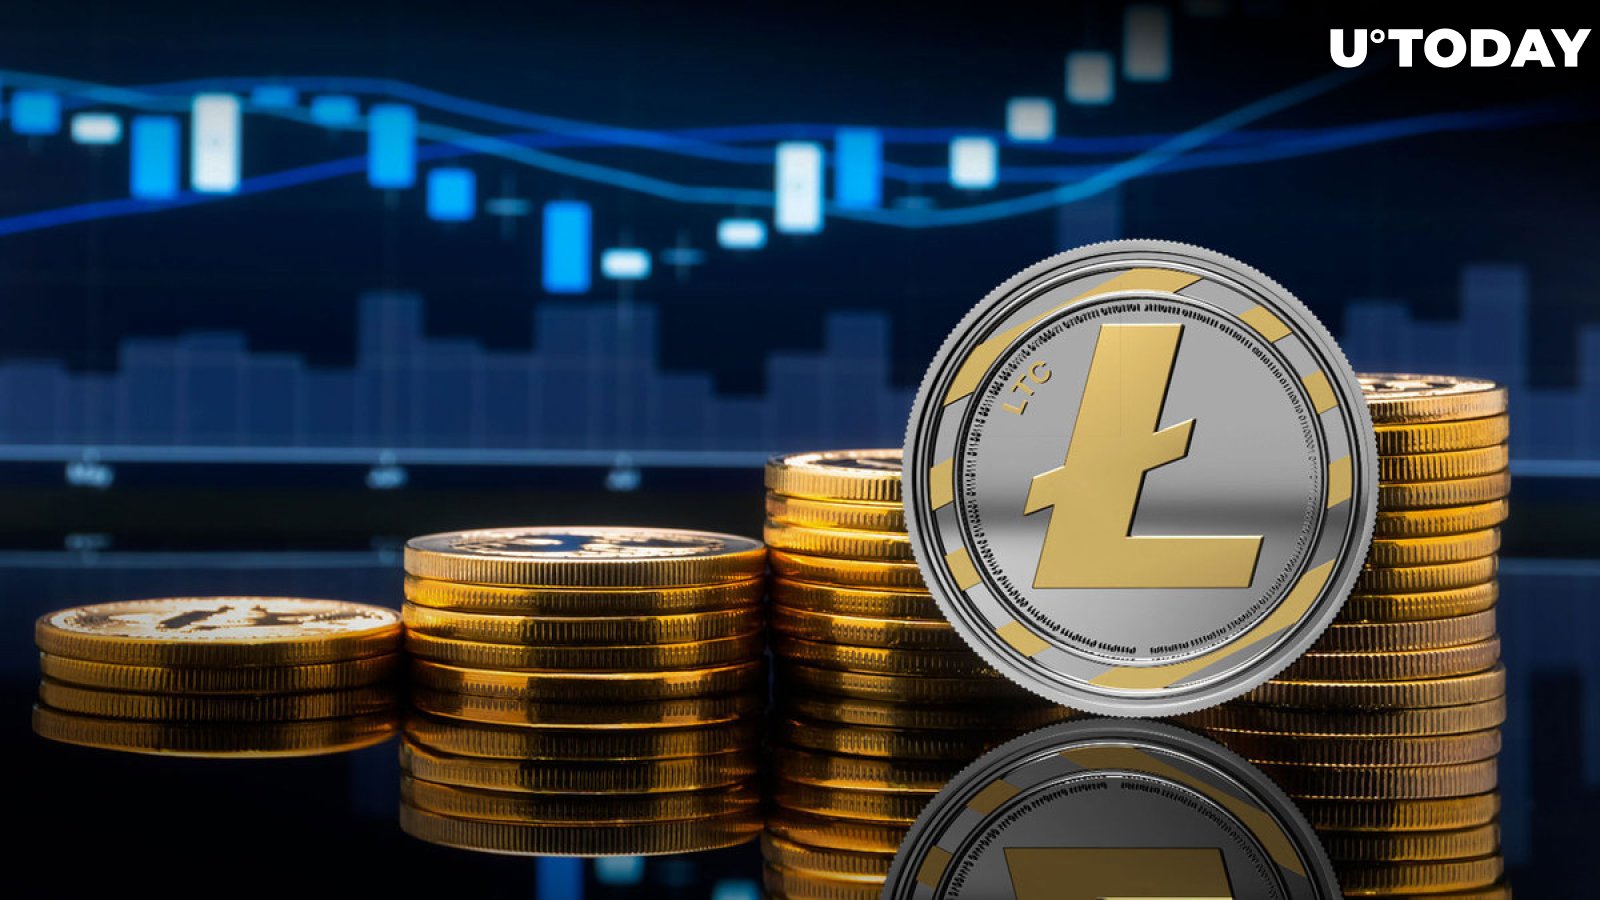 Litecoin (LTC) Dusts BTC, ETH and DOGE as Payment Protocol